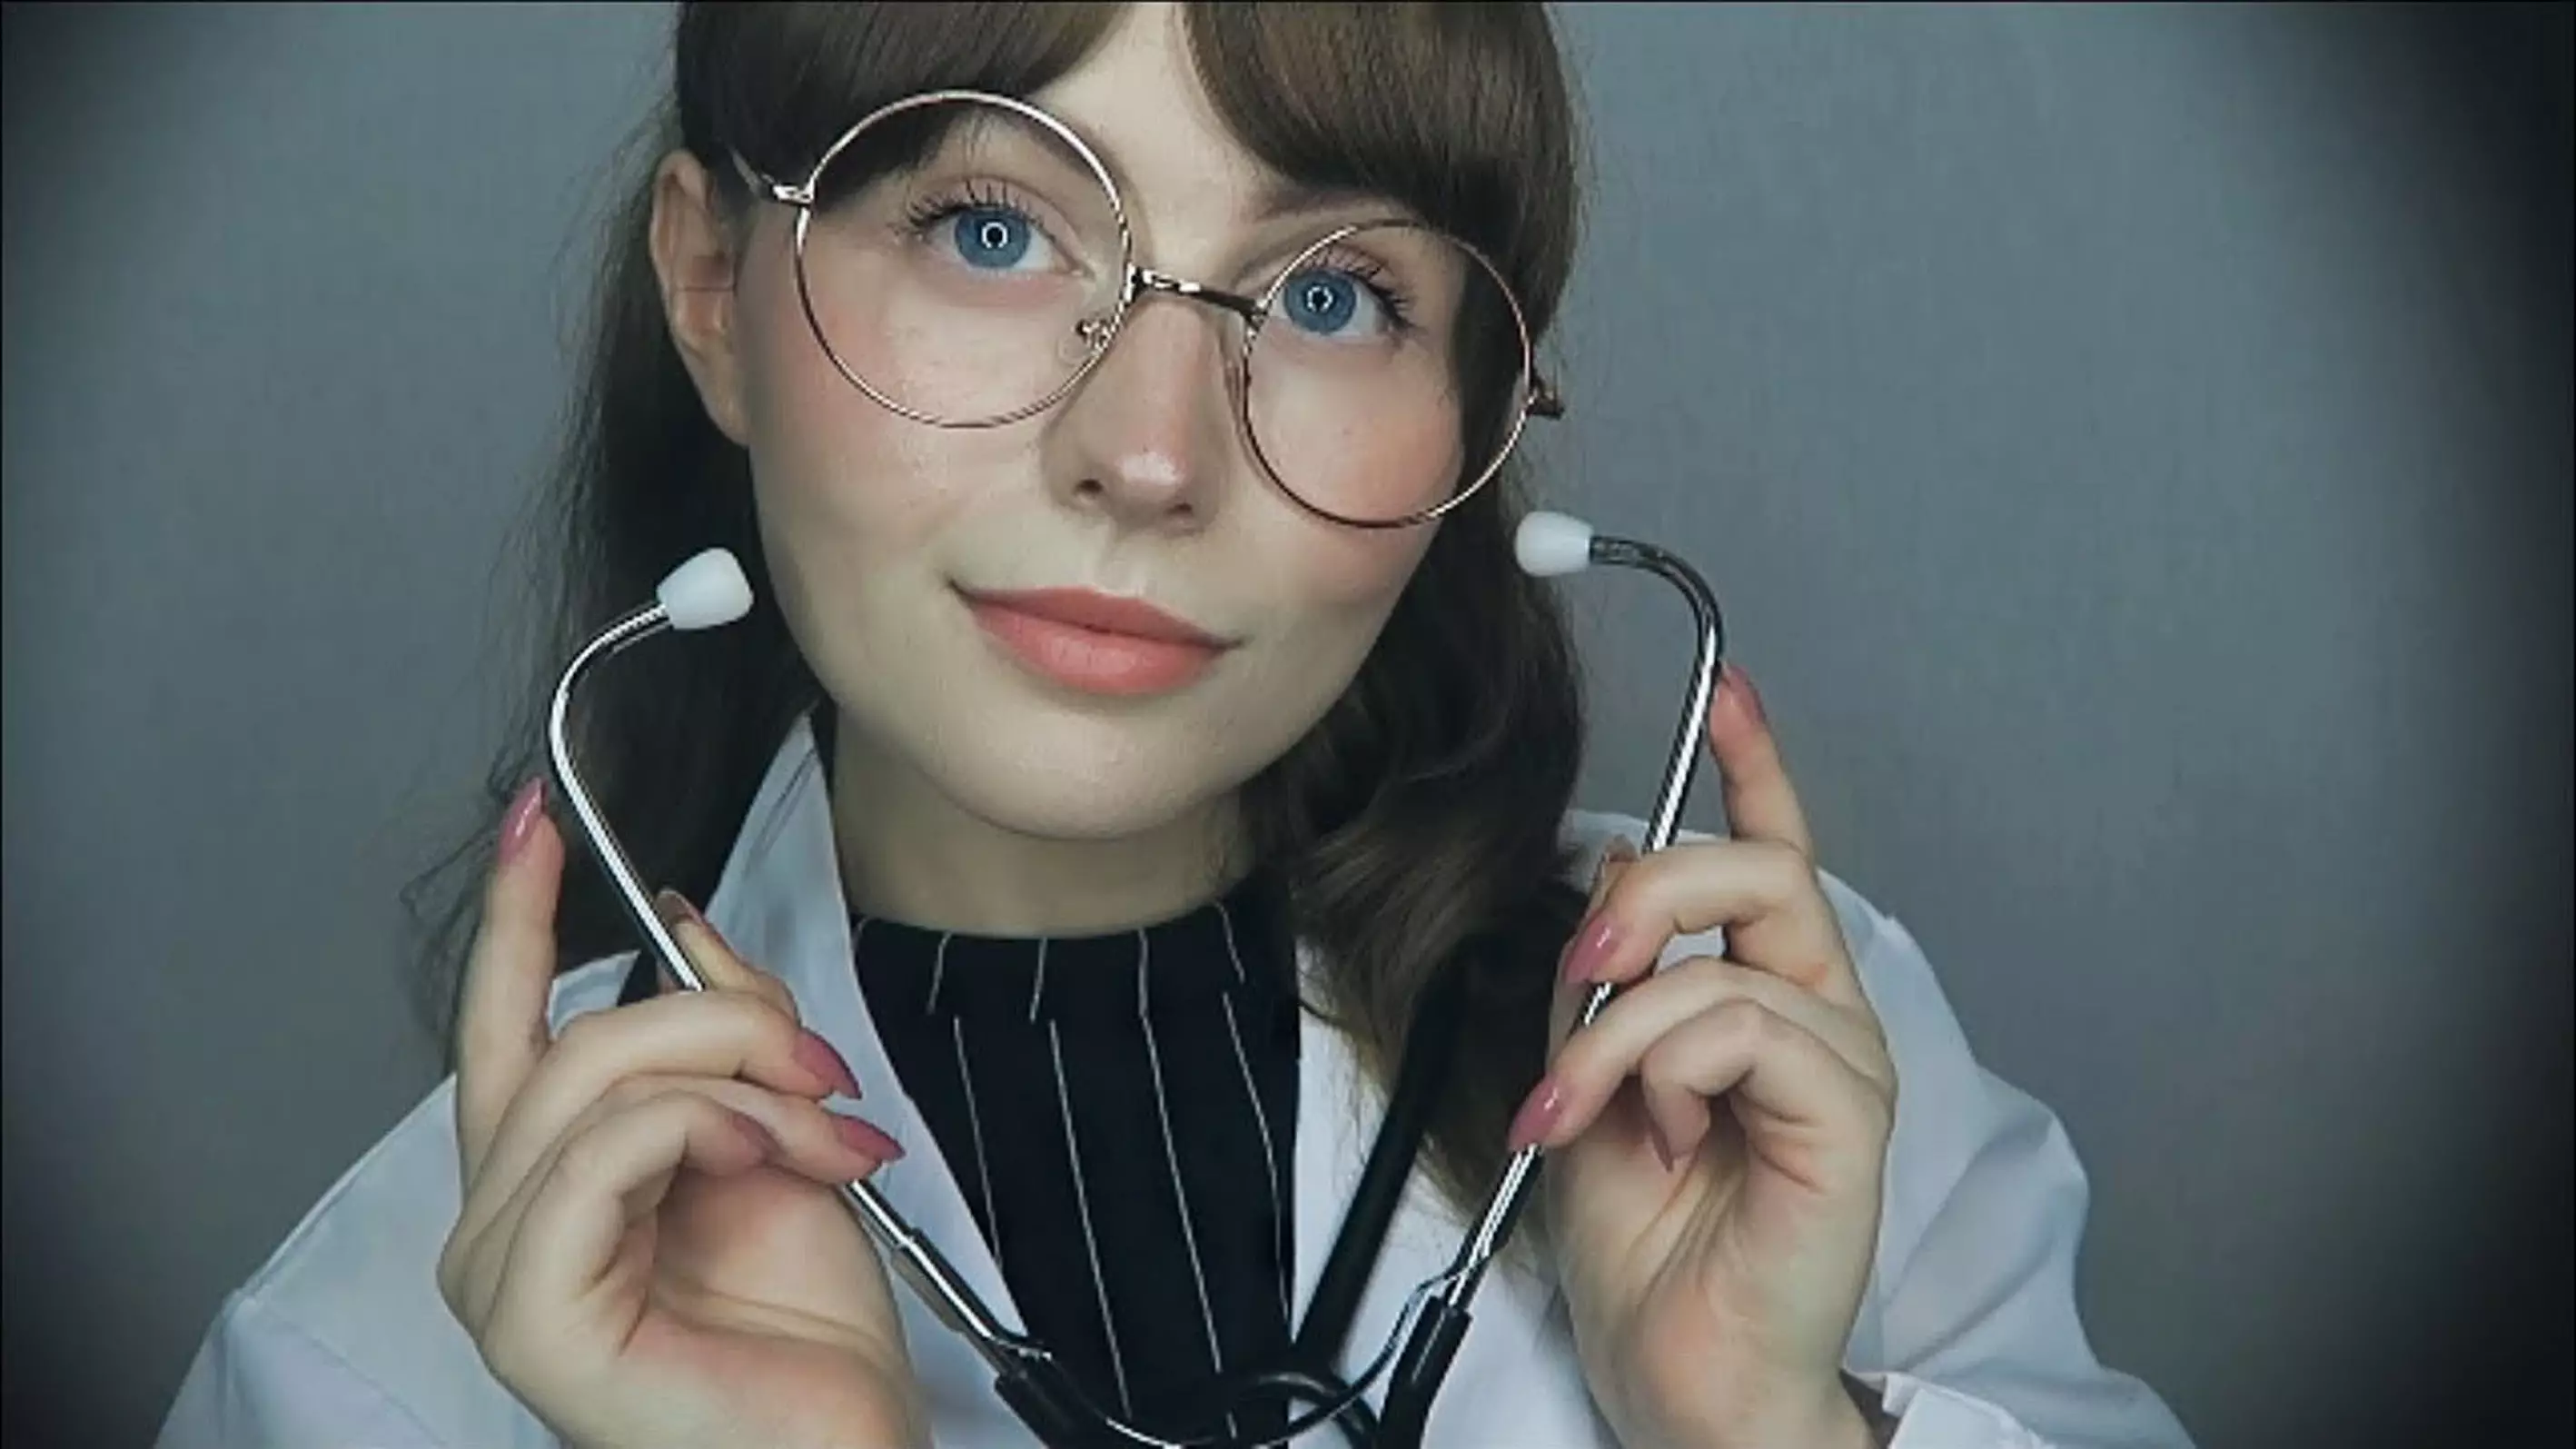 ASMR artist, Sophie Michelle, sometimes dresses as a mermaid or a doctor.